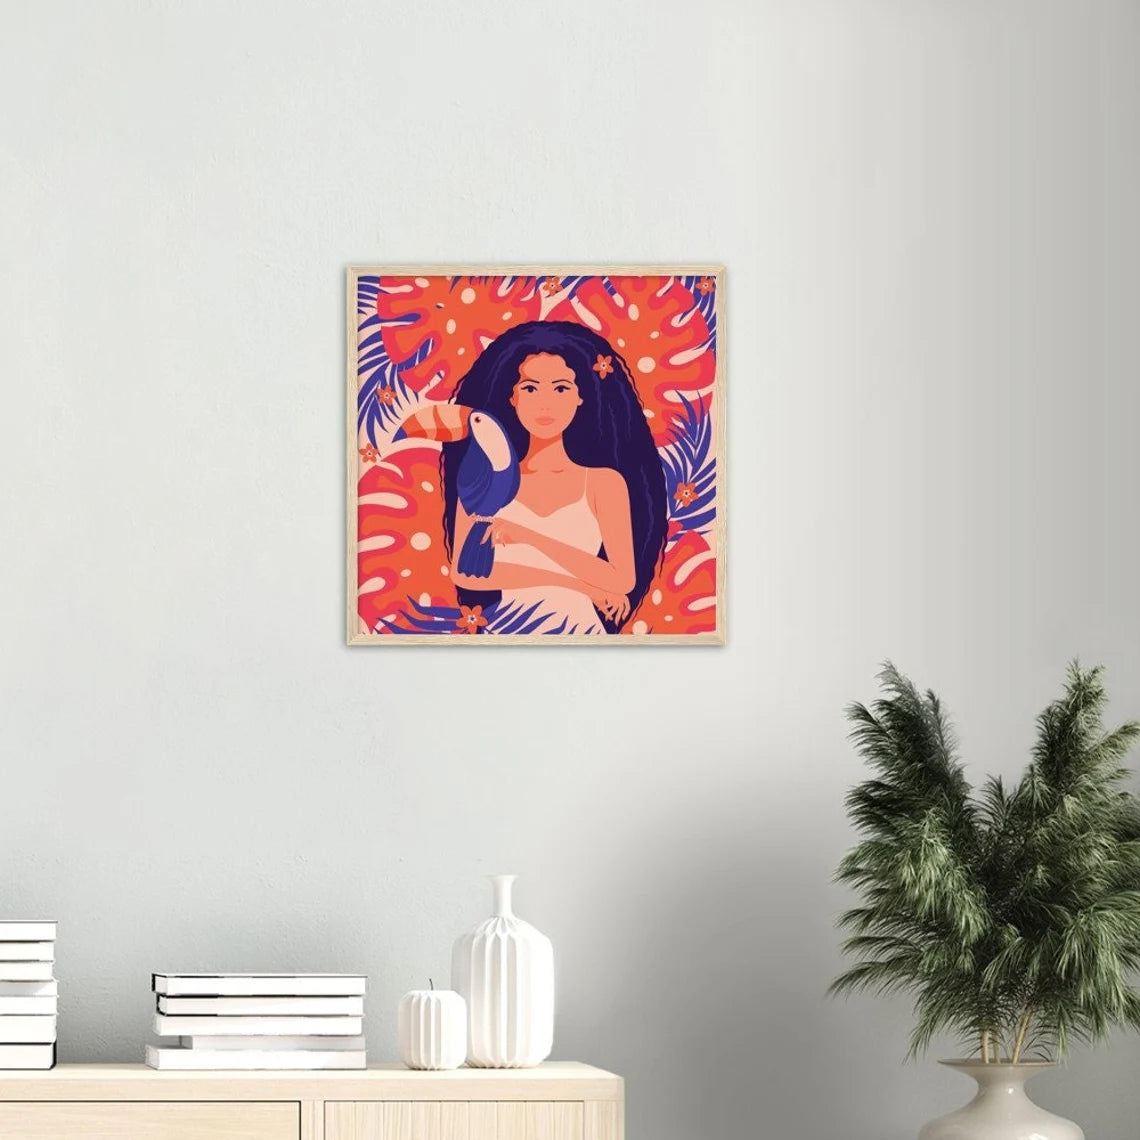 Elivera Designs Illustrations to put on Wall Art, Posters and other Home Décor Products